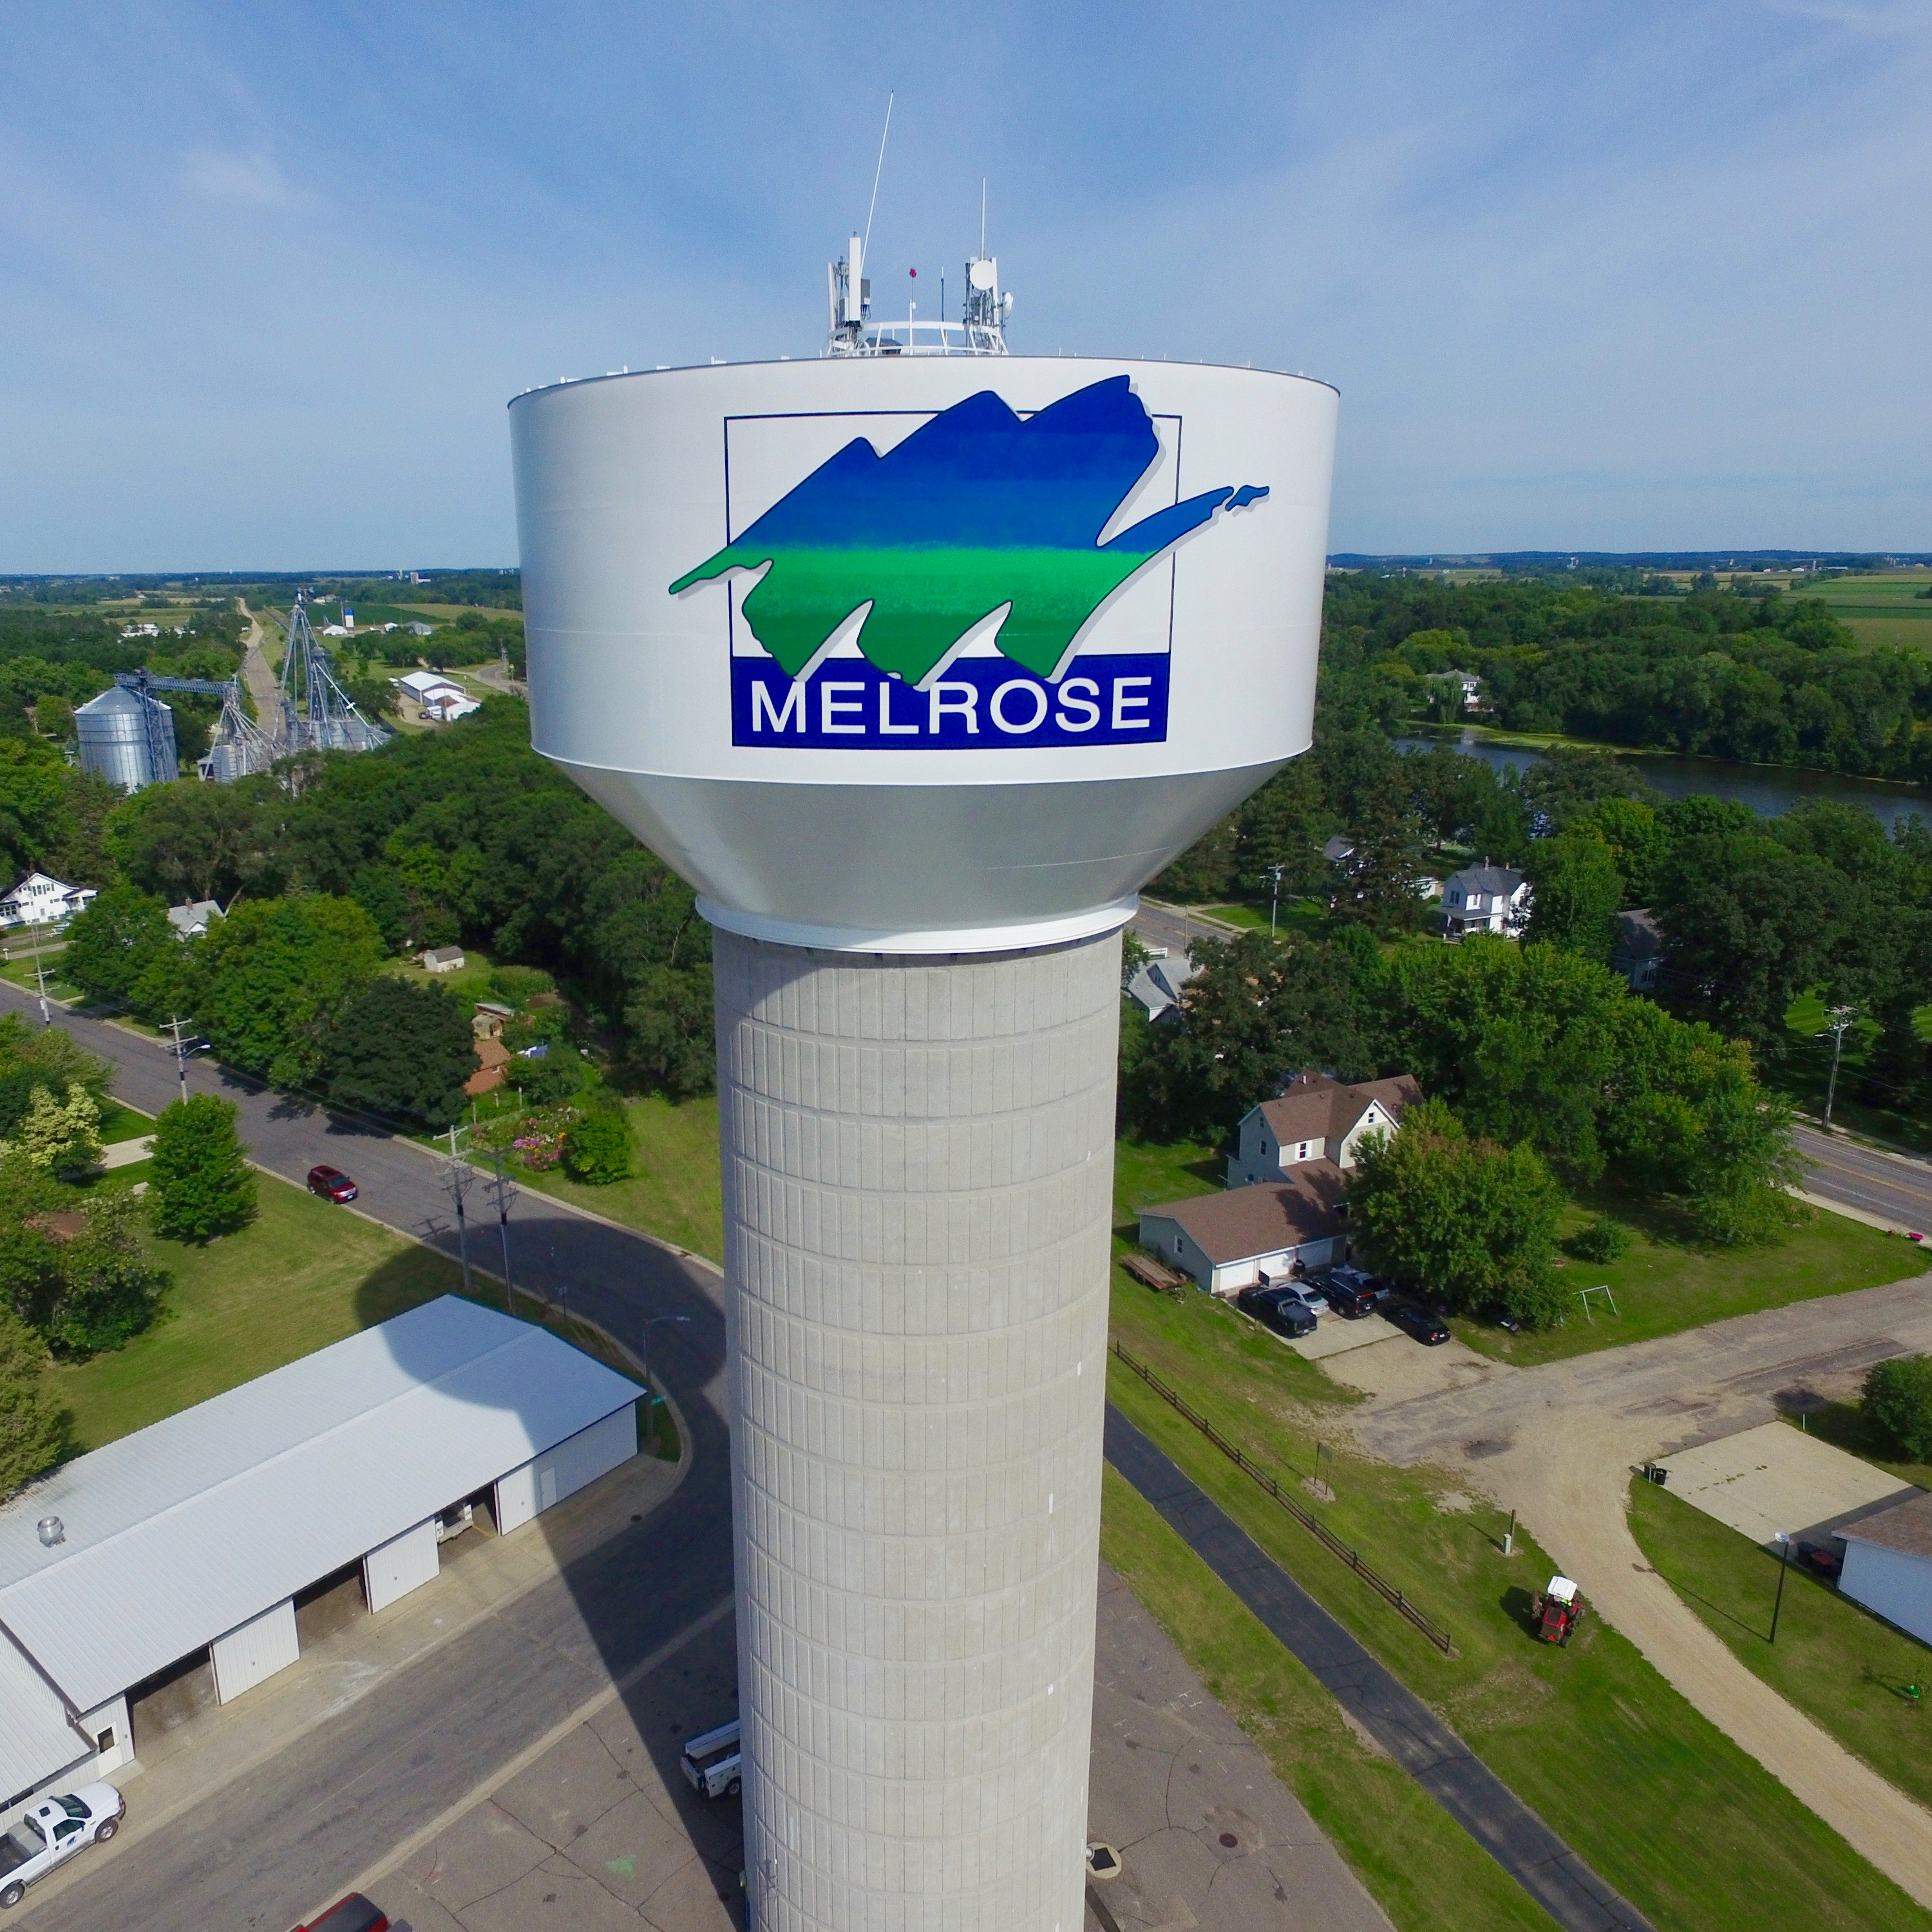 Melrose city water tower